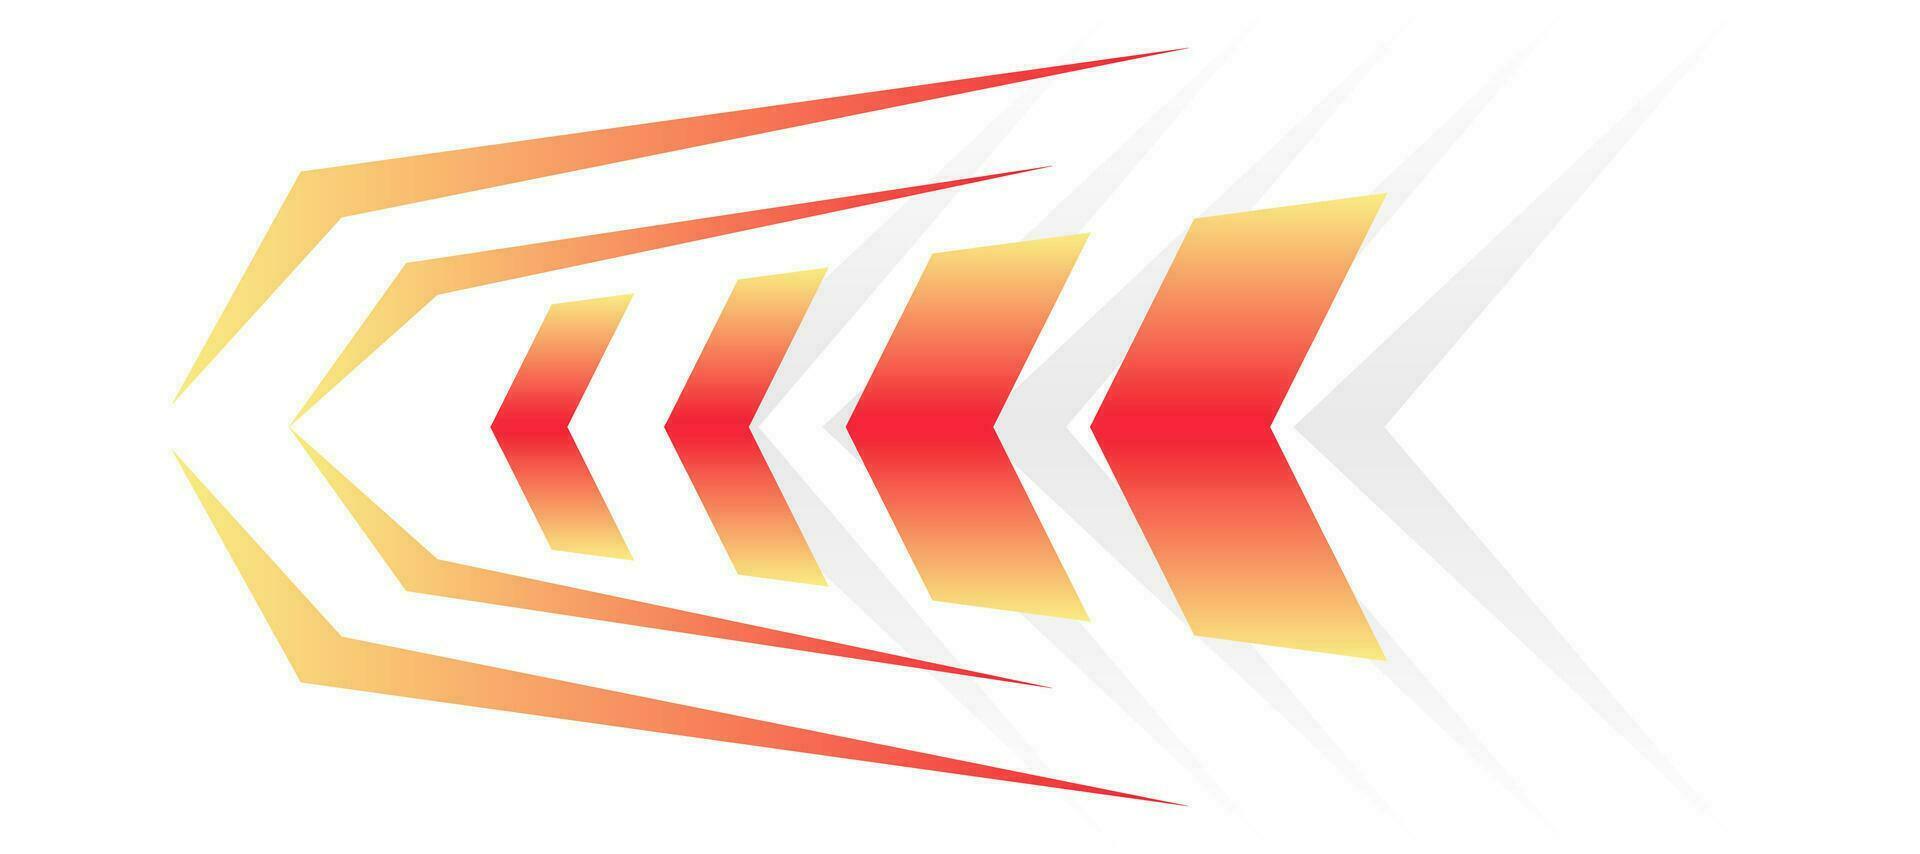 sporty chevron fast red gradient geometric jersey background vector